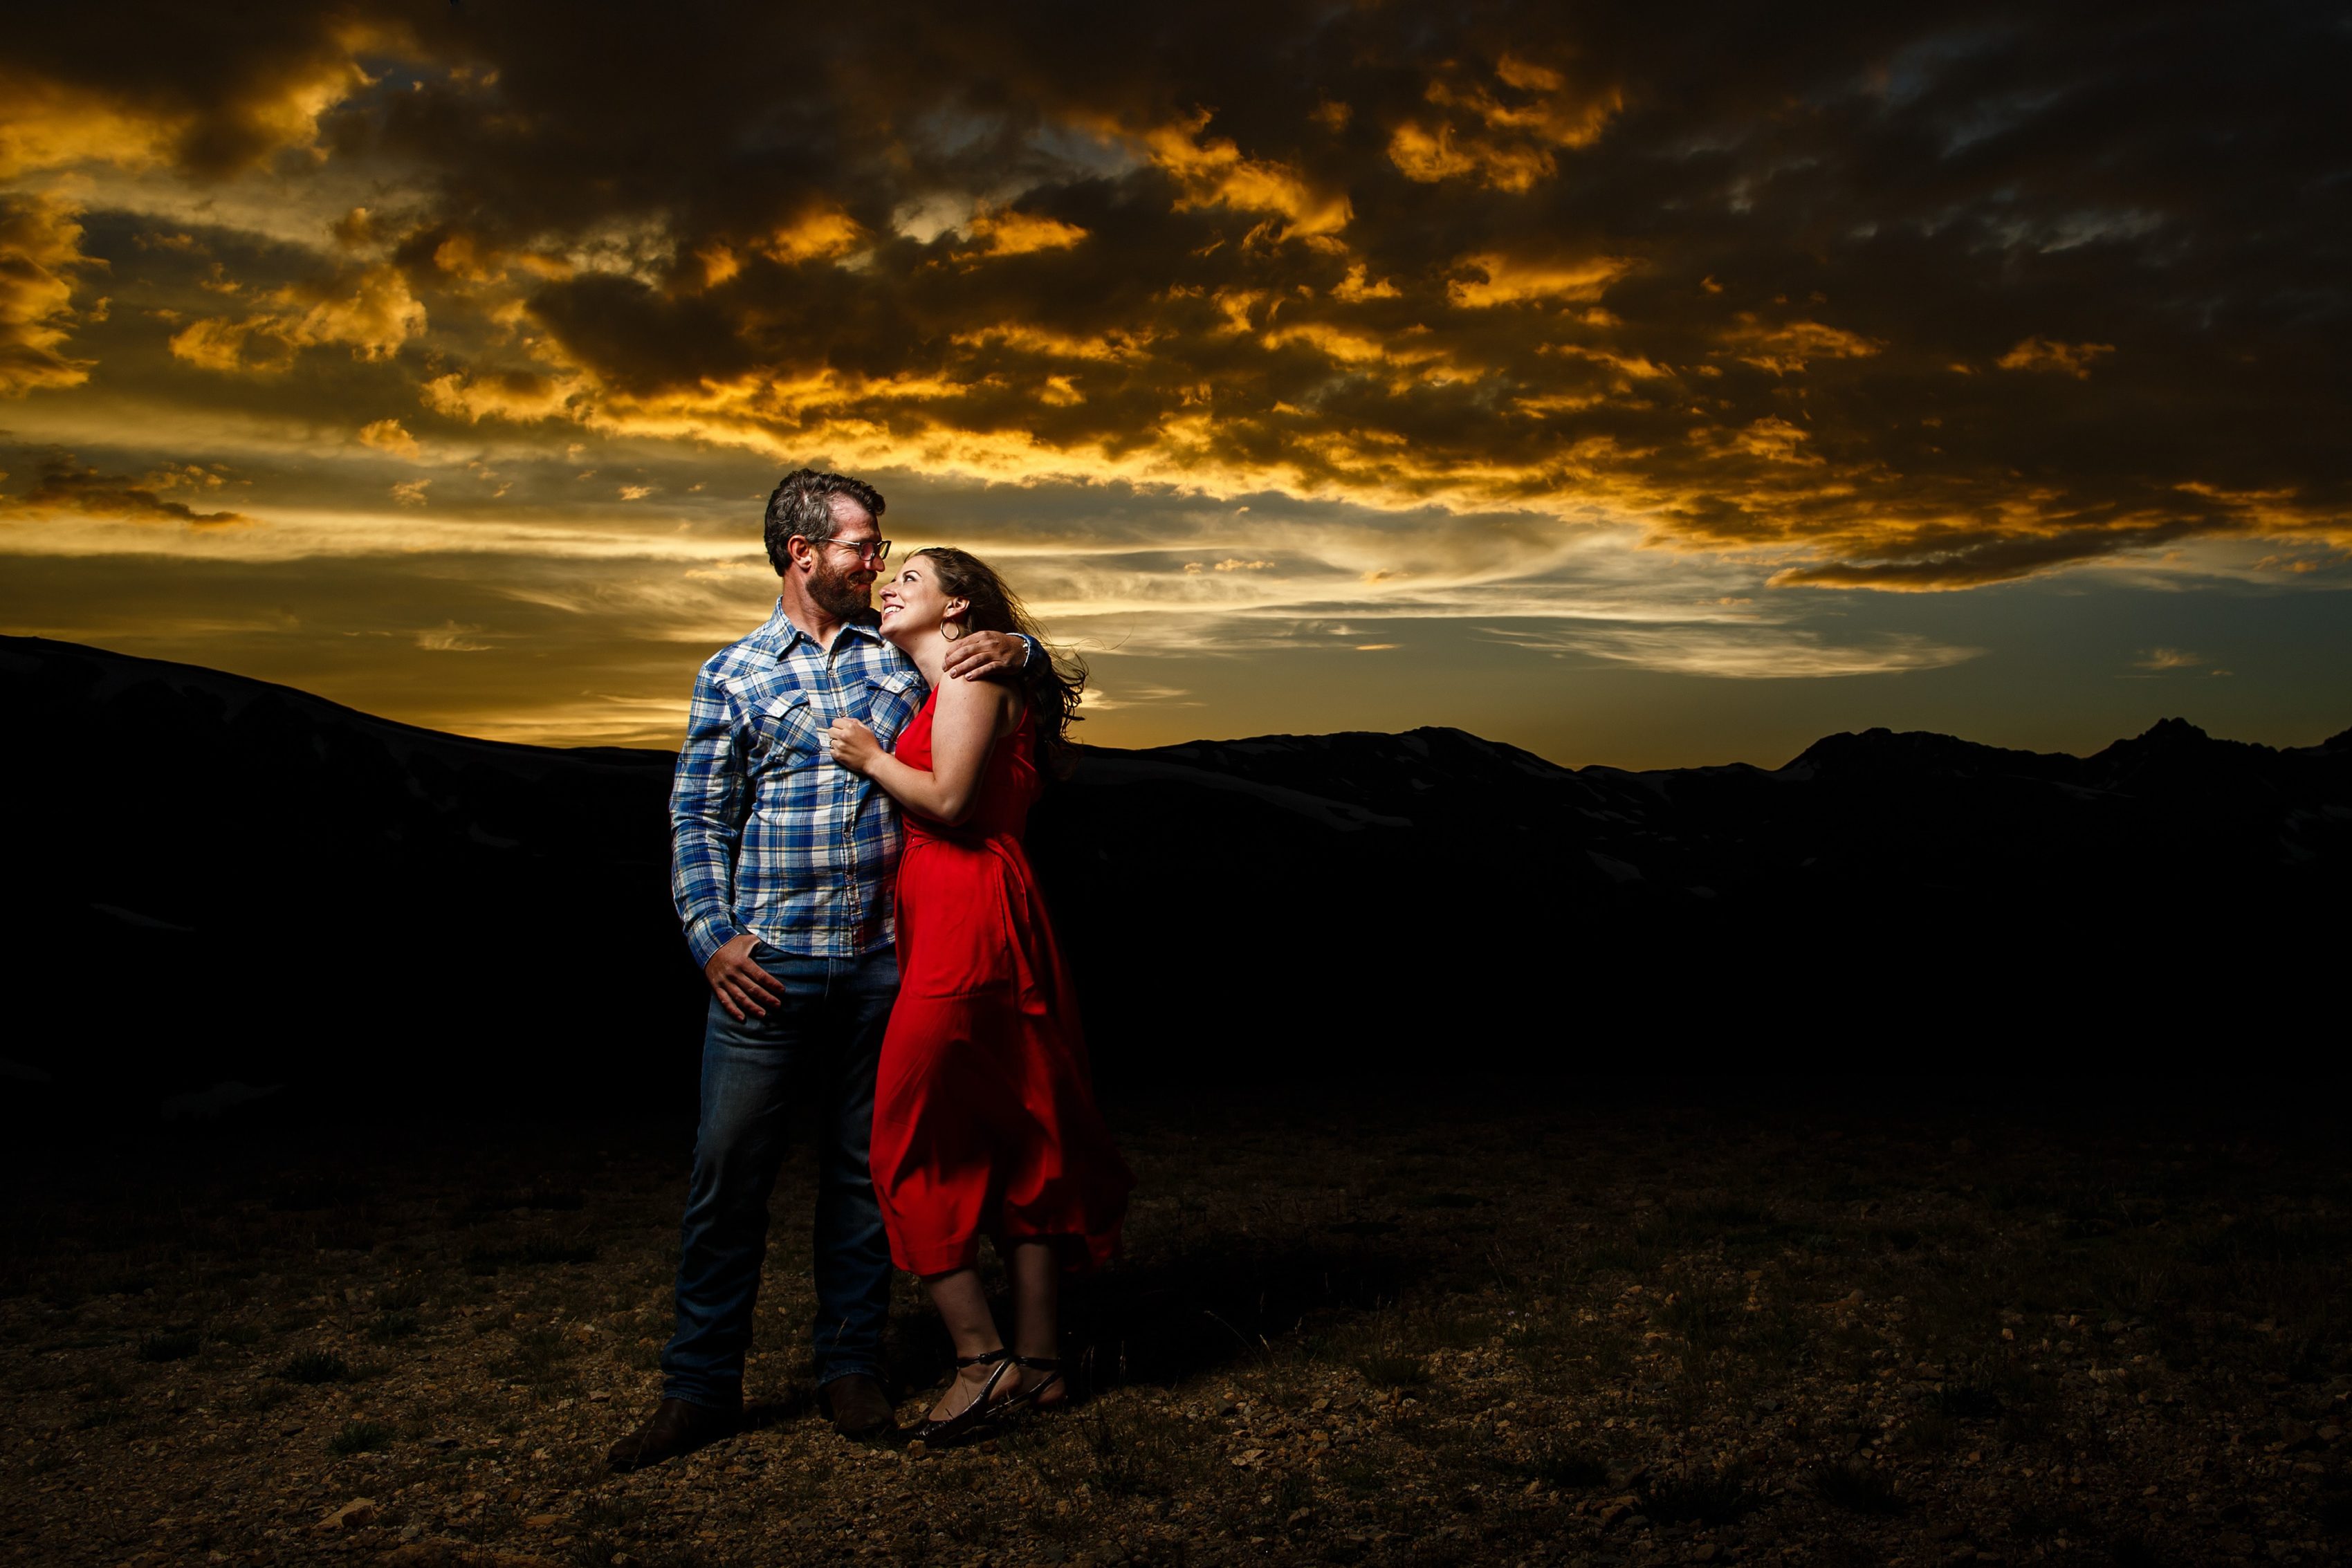 The sun illuminates a beautiful sunset as Mallory and Daniel pose during their summertime engagement photo session atop Loveland Pass near Keystone